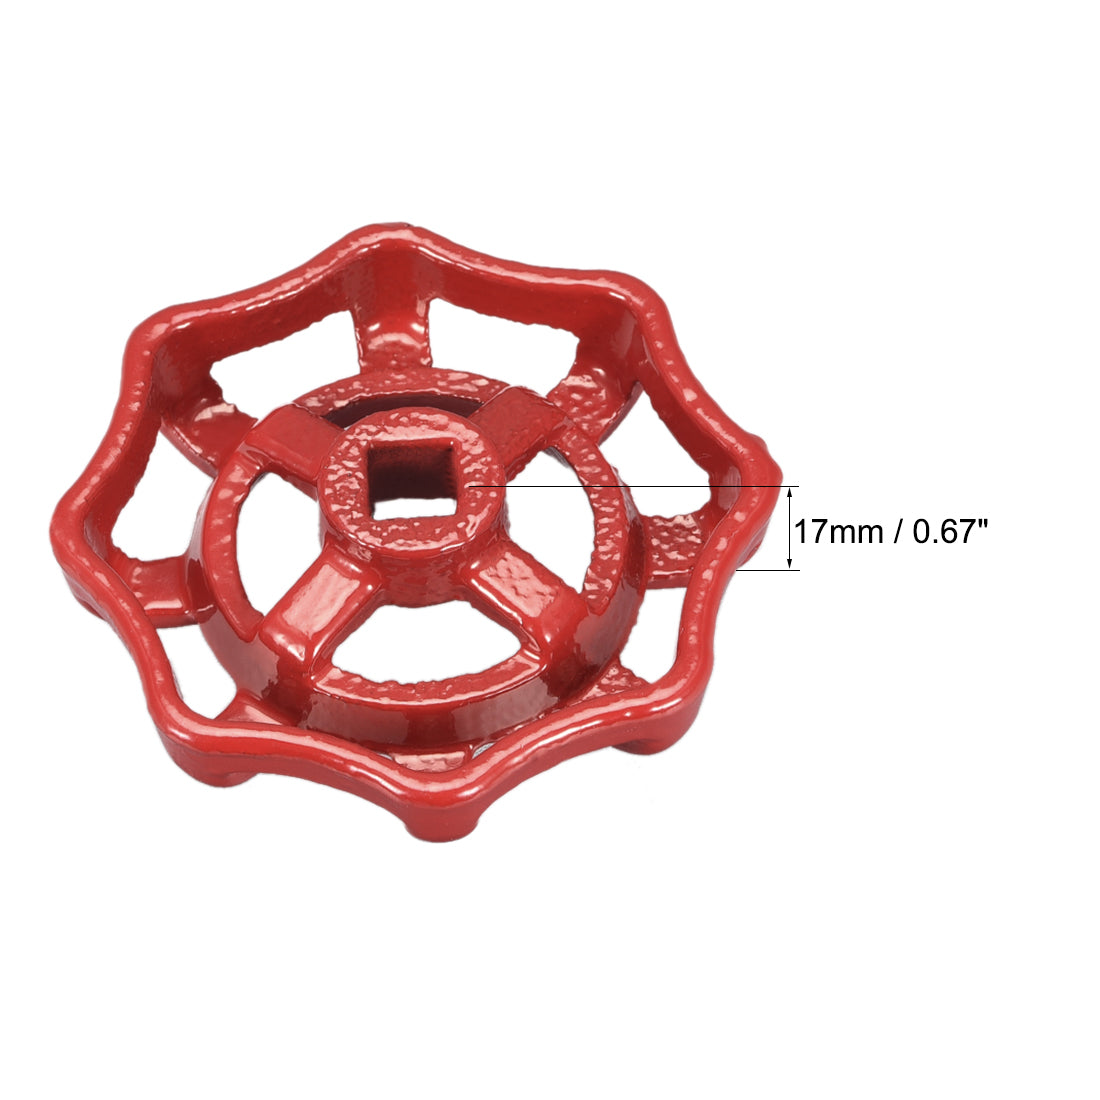 Uxcell Uxcell Round Wheel Handle, Square Broach 7x7mm, Wheel OD 63mm Paint Cast Steel Red 6Pcs